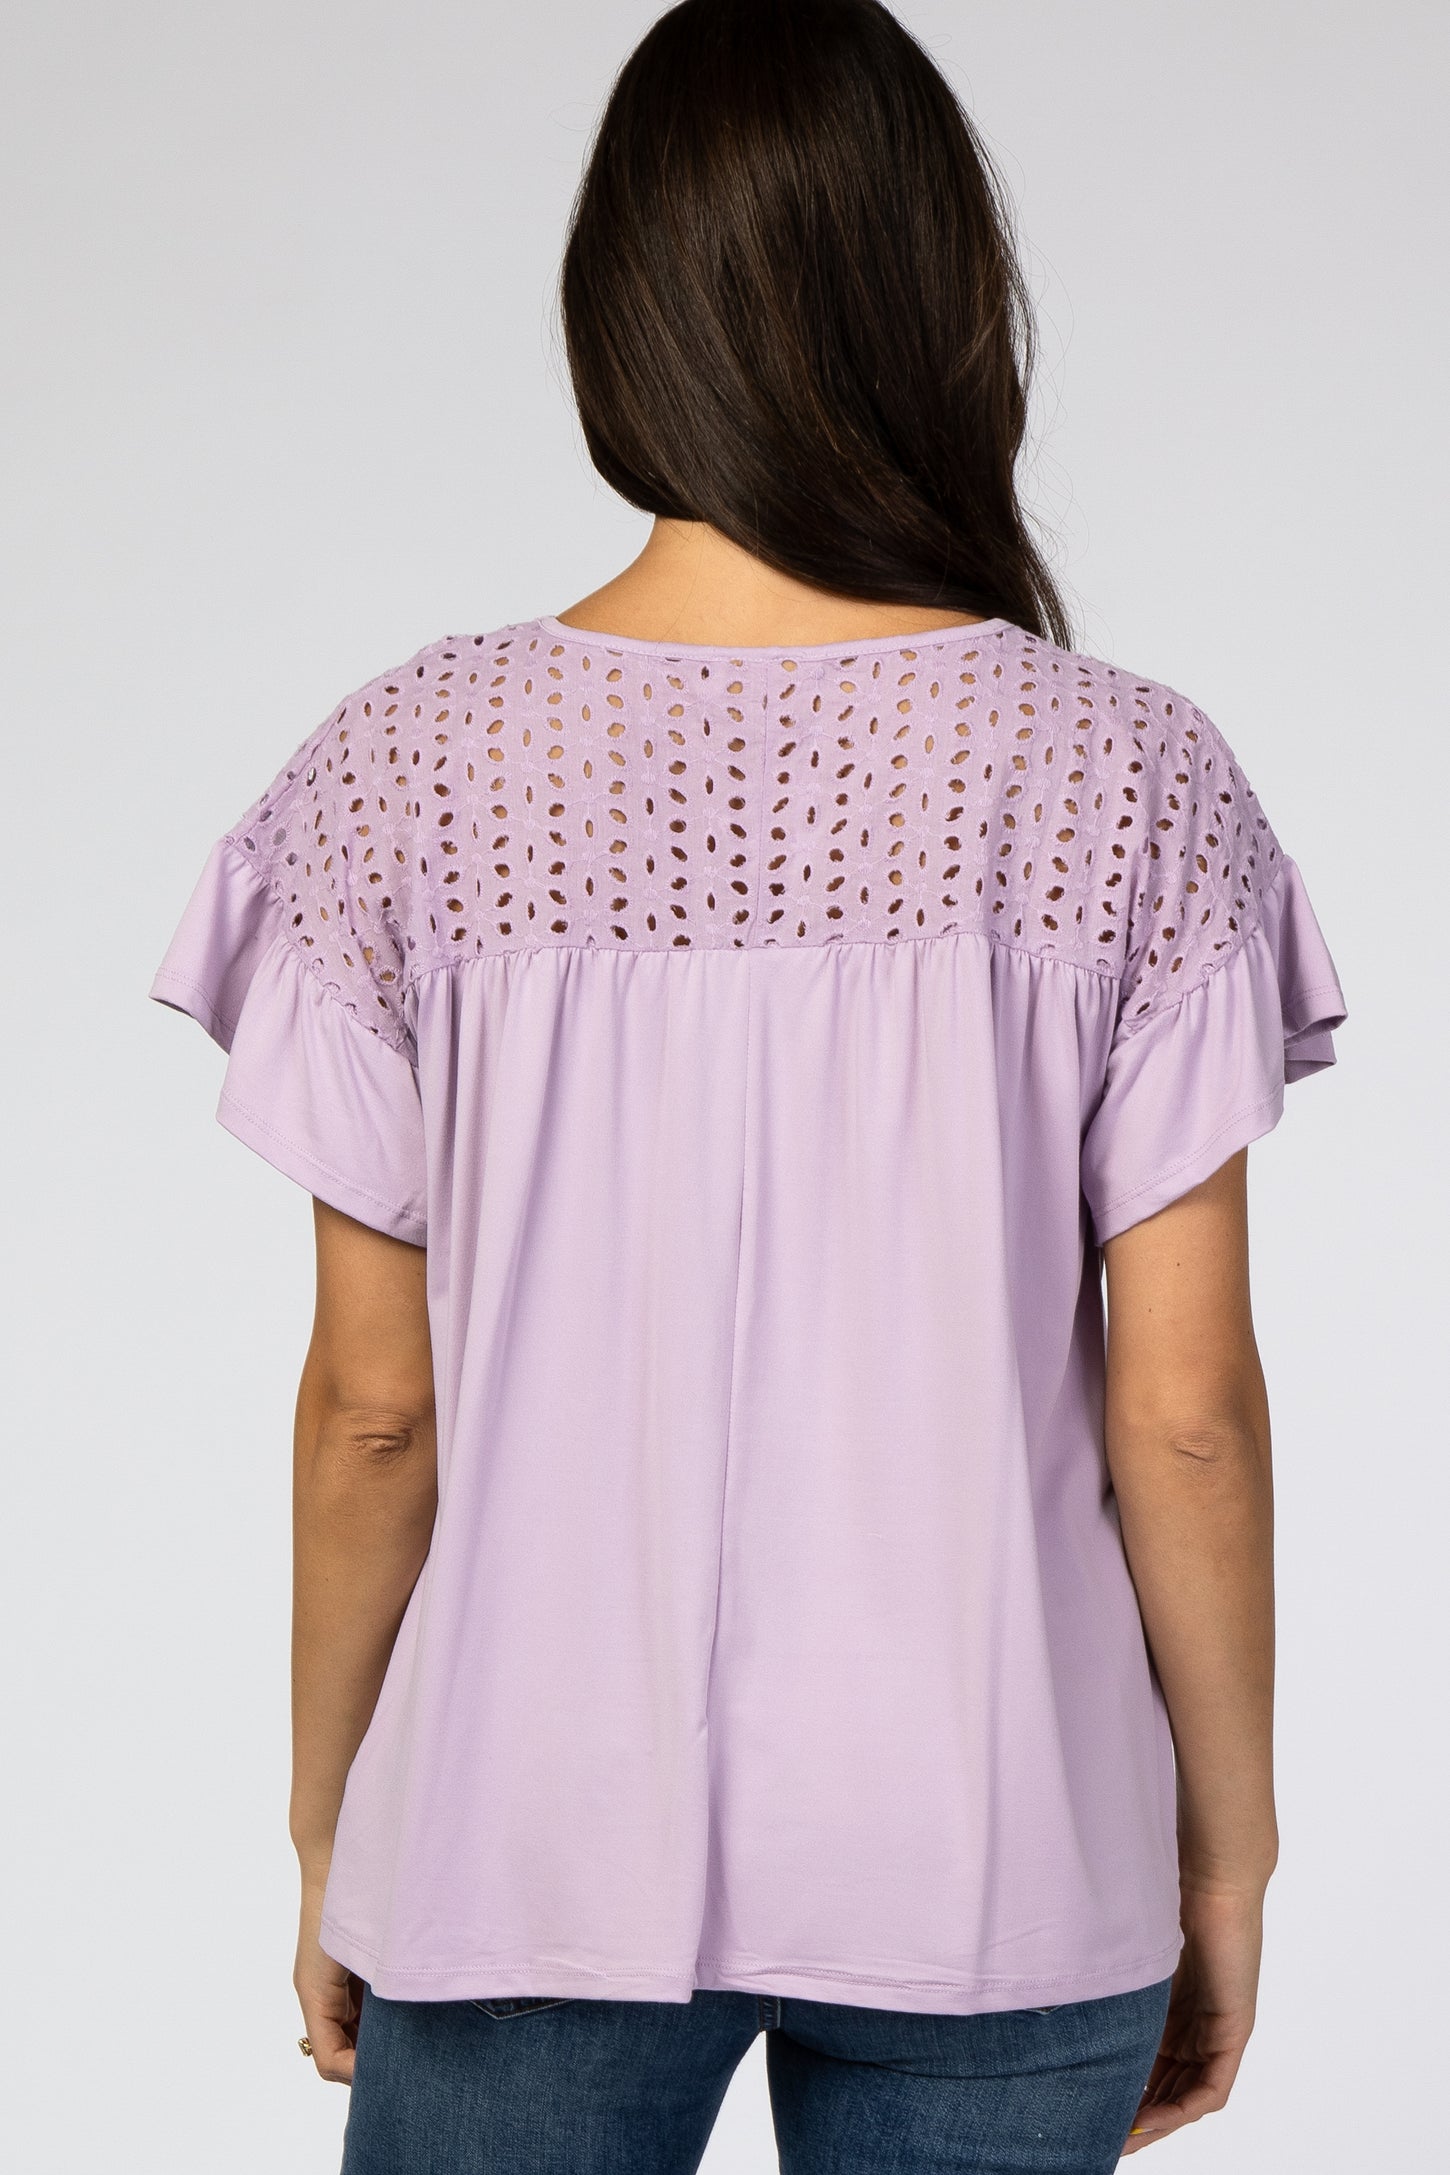 Lavender Eyelet Accent Top